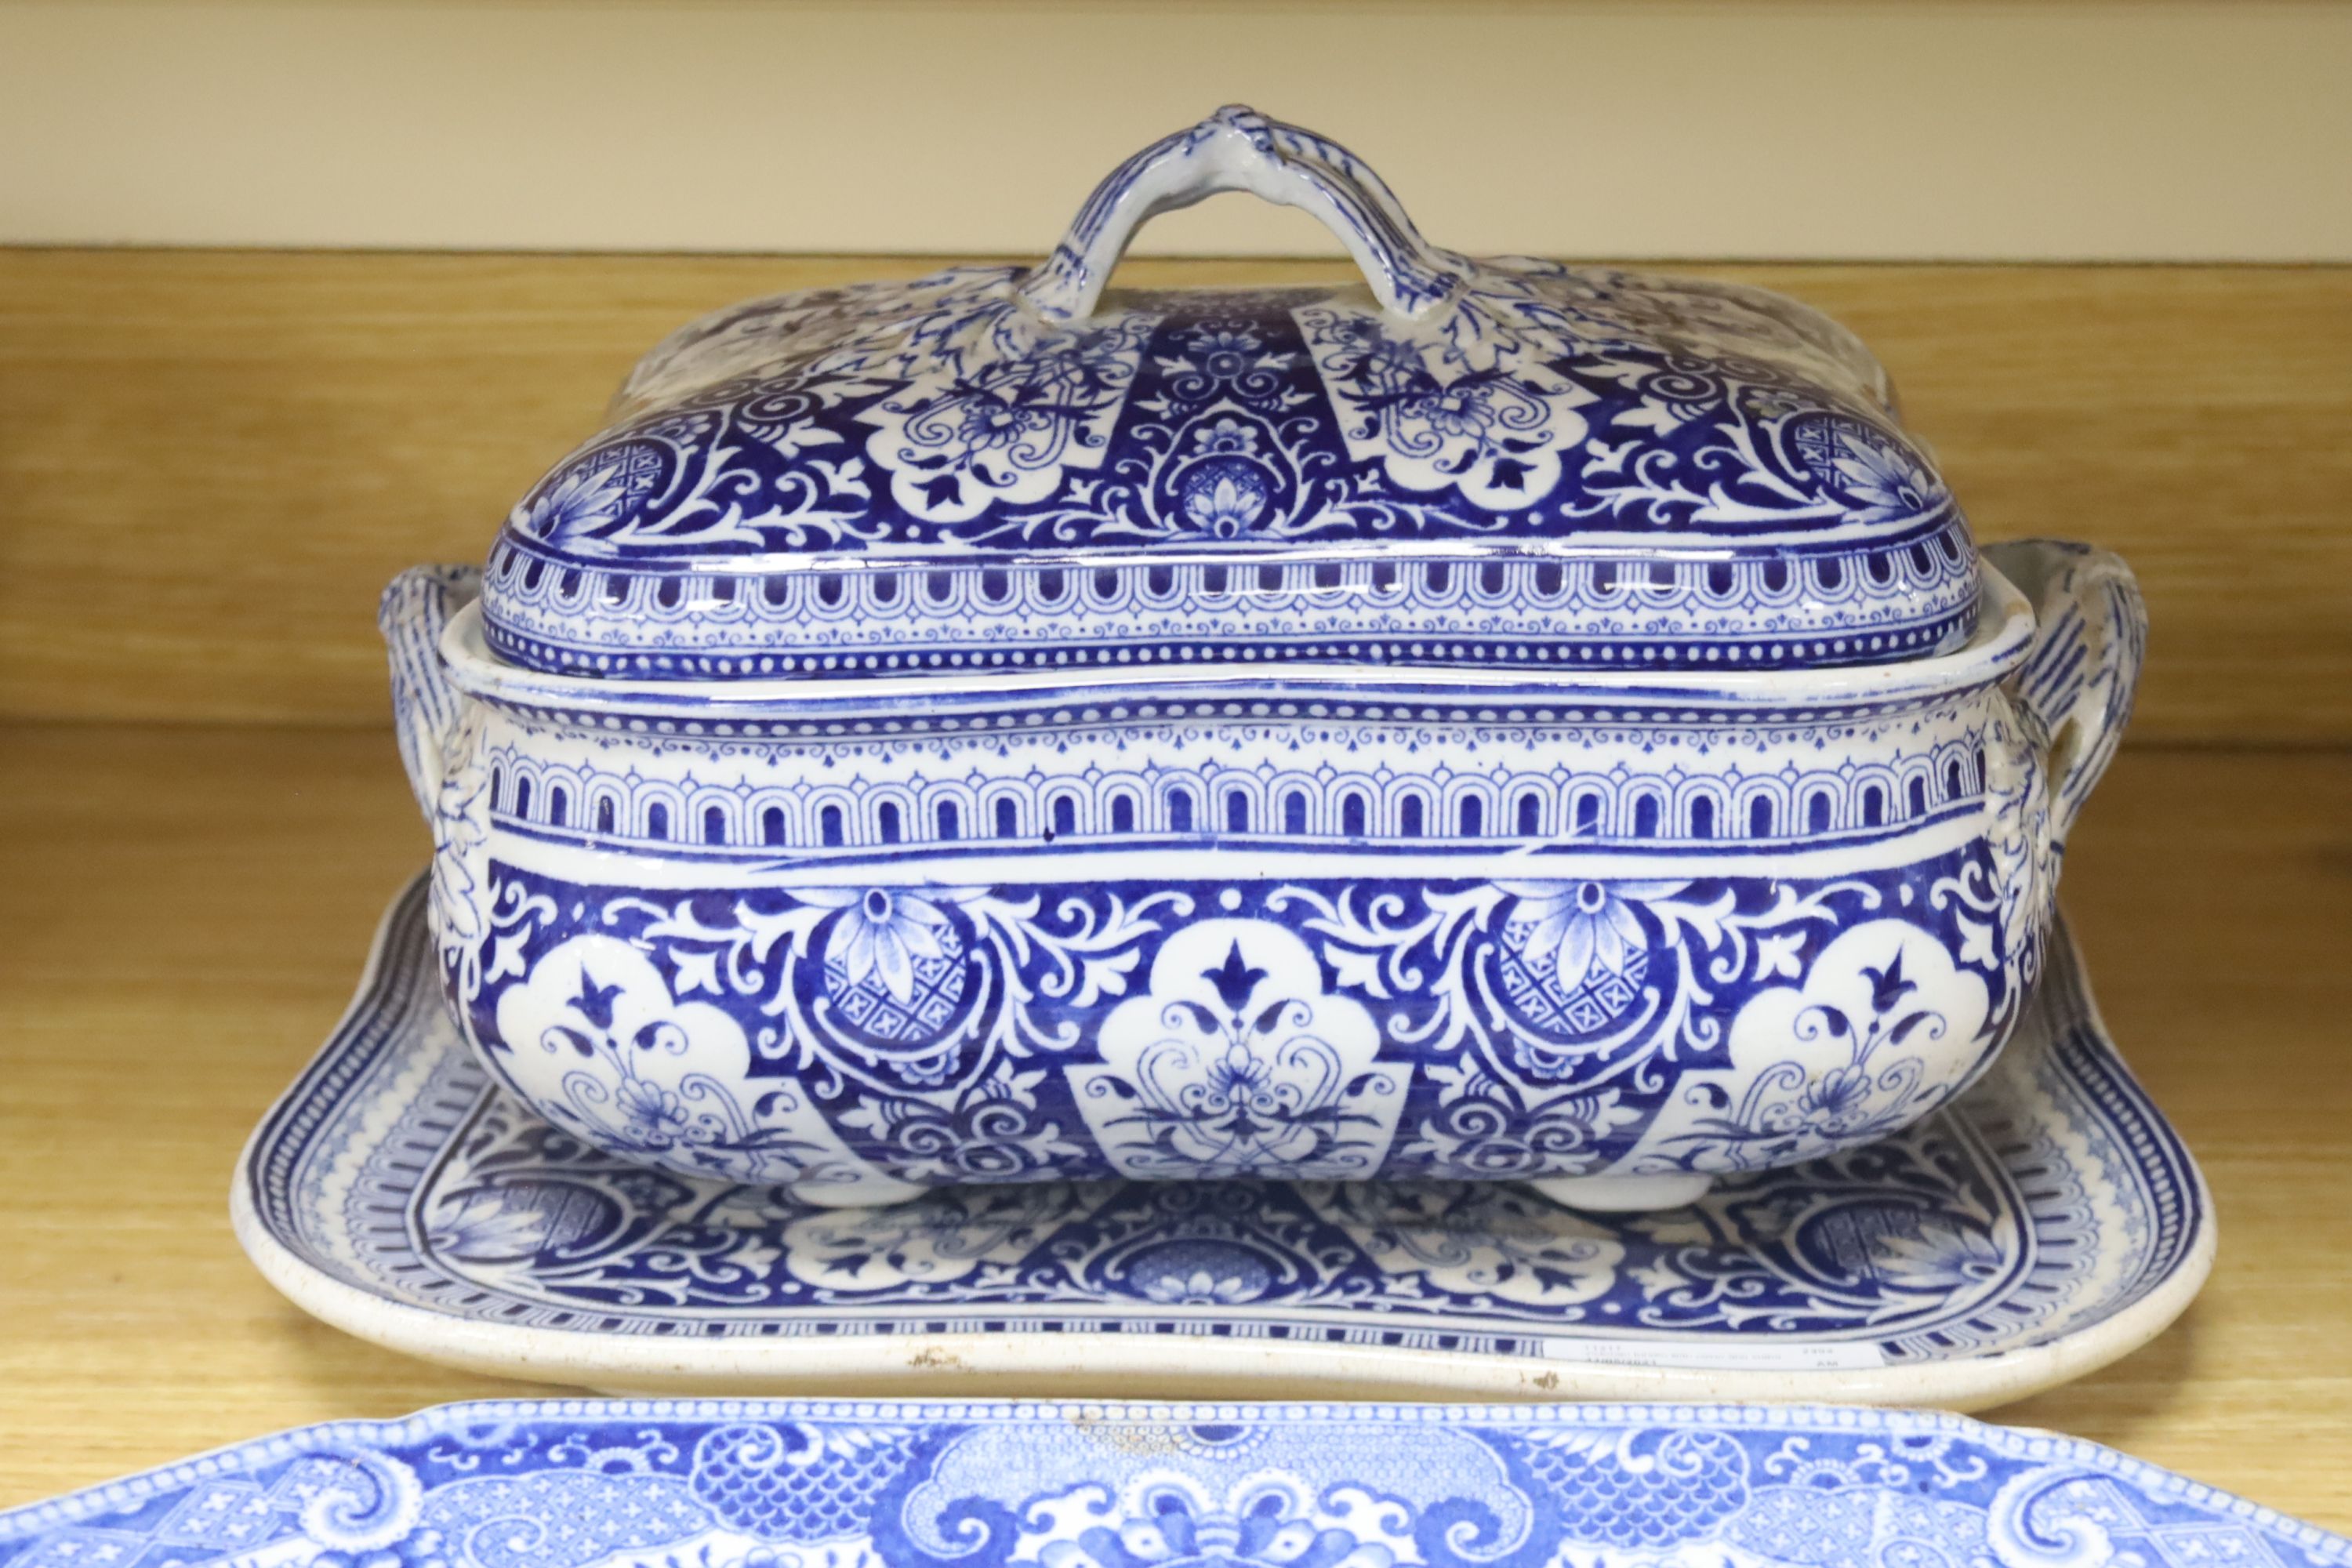 A blue and white meat dish decorated with a Chinese landscape pattern, and a Victorian blue and white tureen, cover and stand, height 17cm